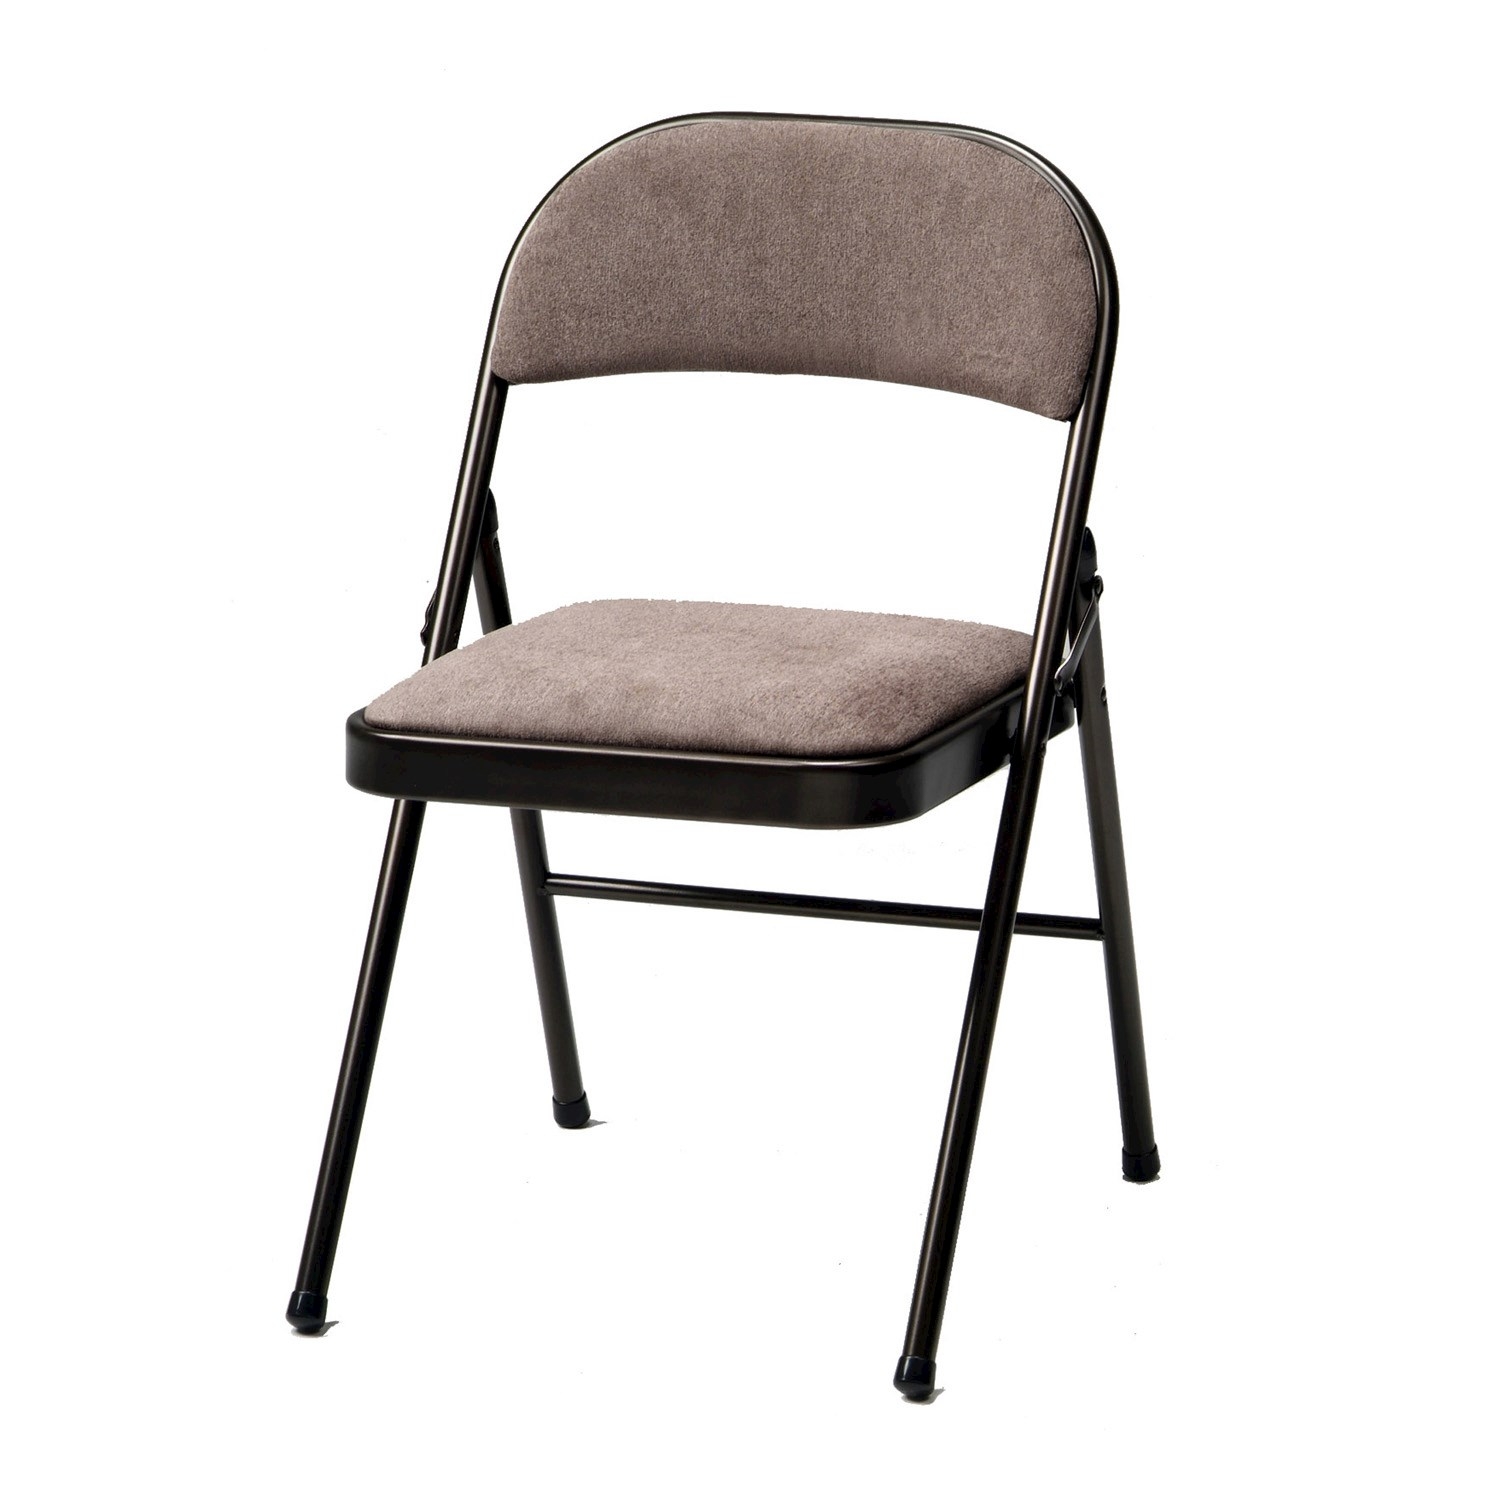 Deluxe Fabric Padded Folding Chair (Set of 4)